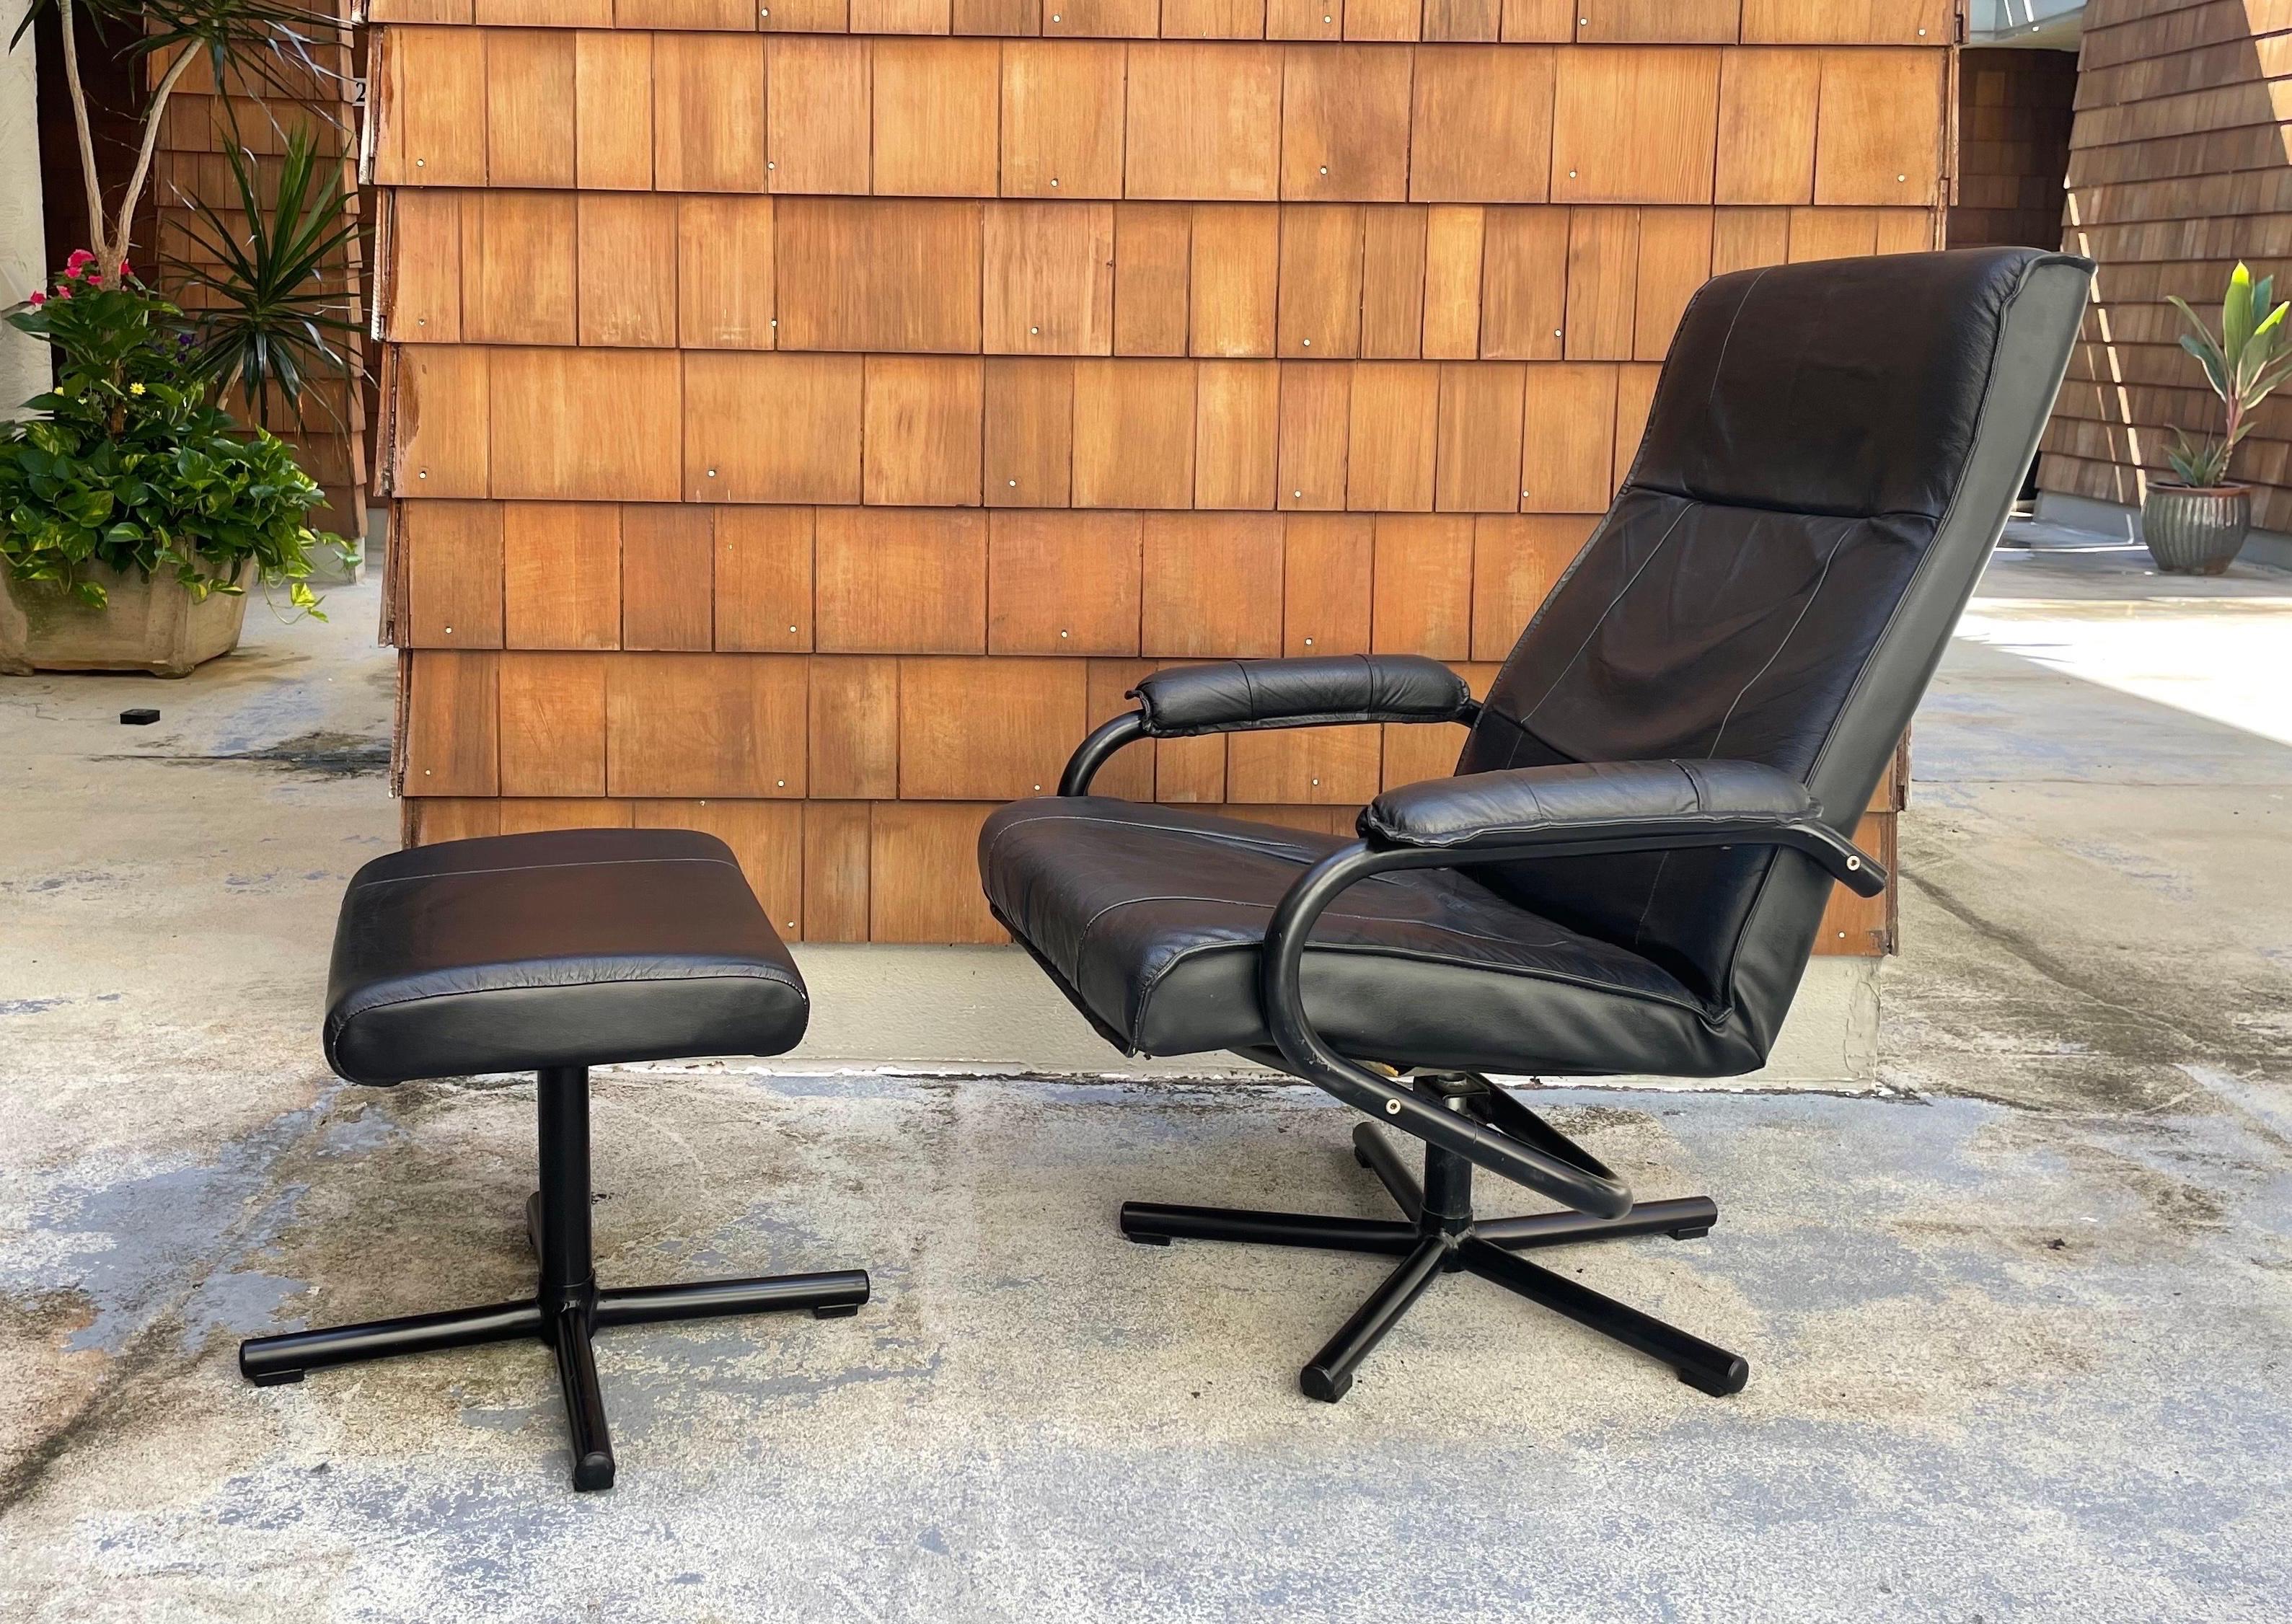 A black leather recliner with matching footstool by Kebe. Made in Denmark circa 1980s. High-quality construction, sleek design offering maximal comfort. 

Measures: Overall height 40.5”
Seat height 17.5”
Seat depth 20”
Seat width 23”
Width between